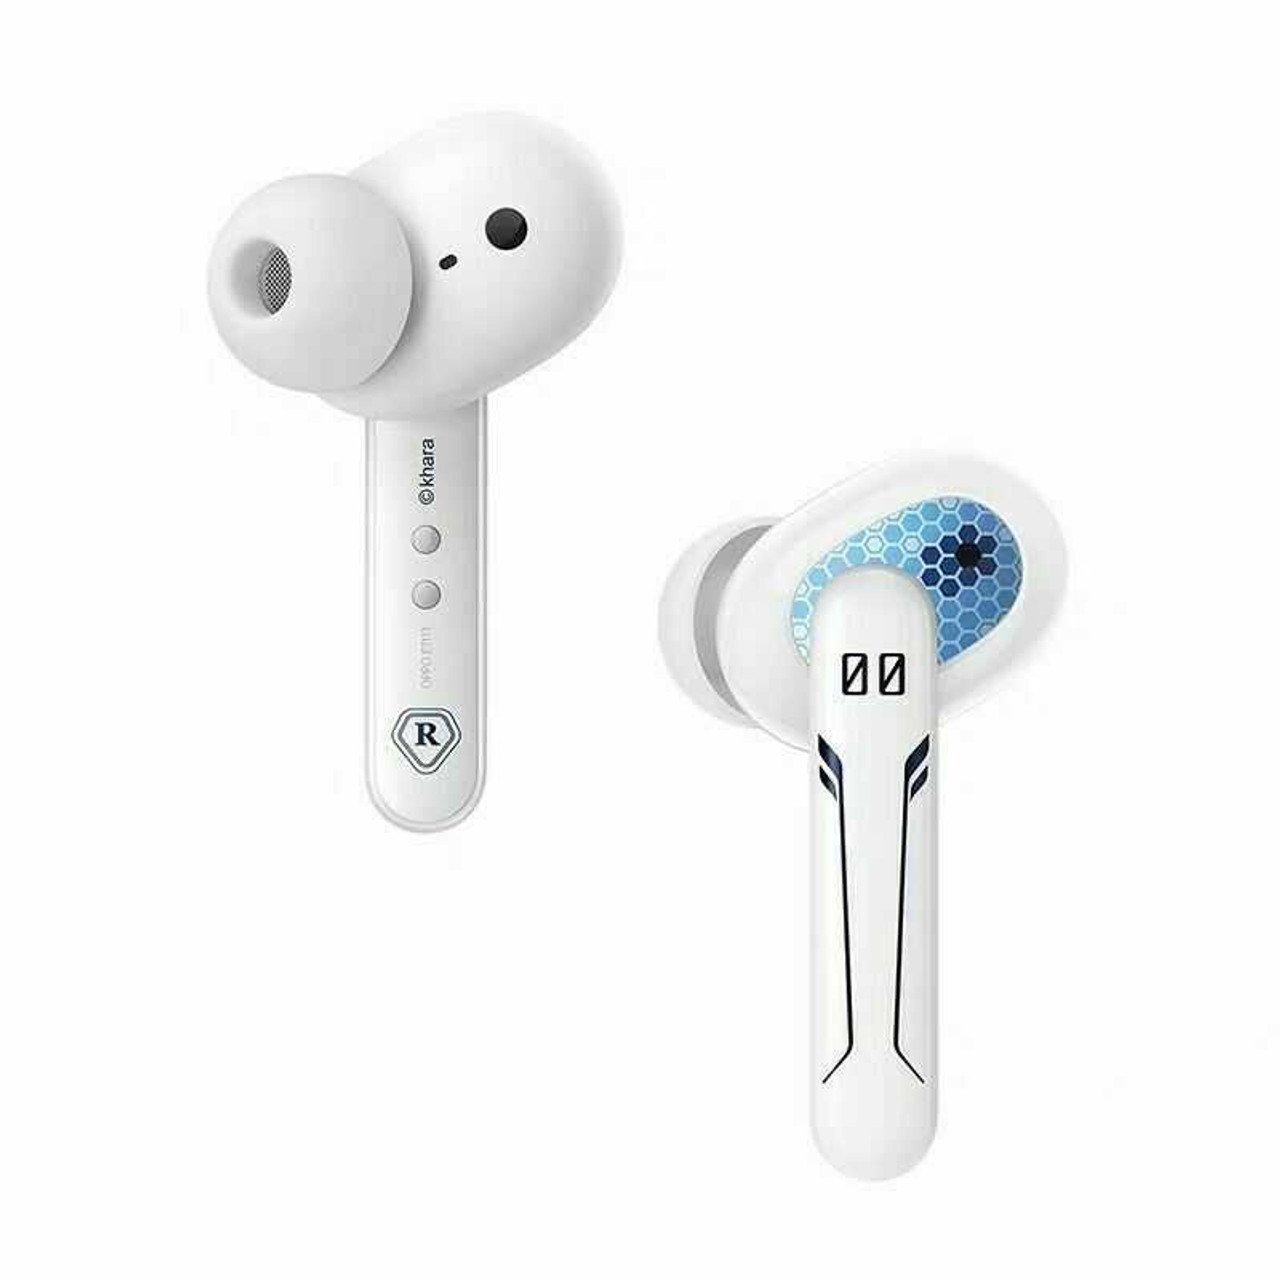 Oppo Enco Air earbuds: the new AirPods rival that costs just £69